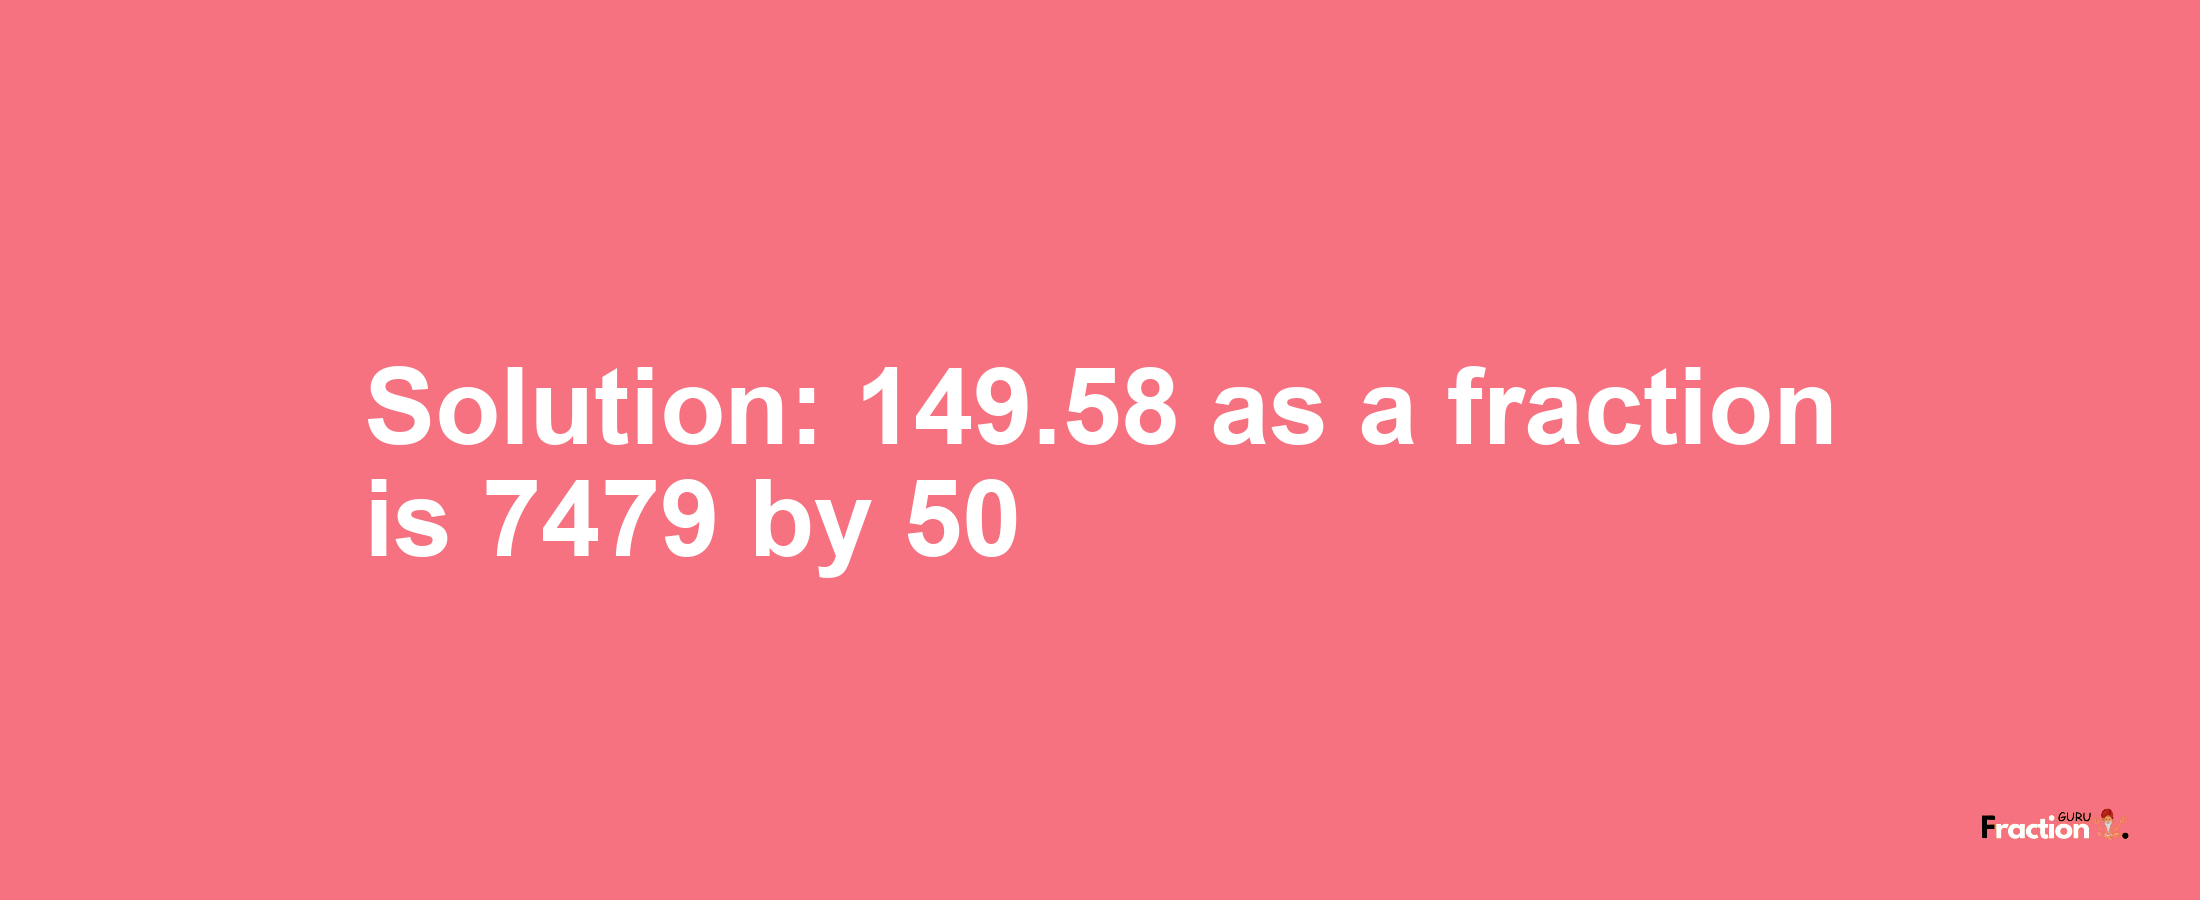 Solution:149.58 as a fraction is 7479/50